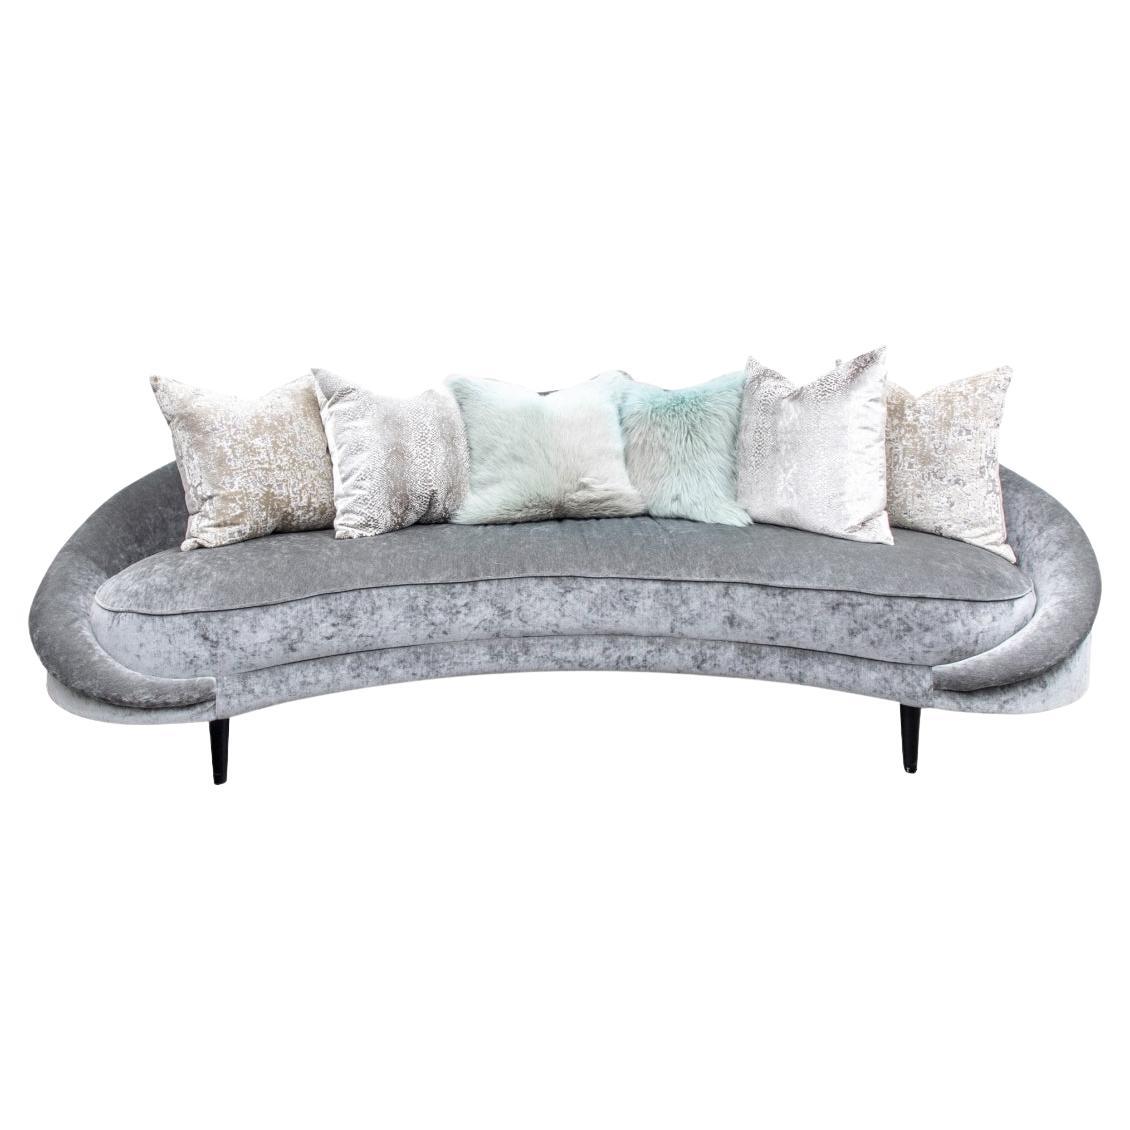 Crescent Shaped Sofa Covered Plush Fabric For Sale